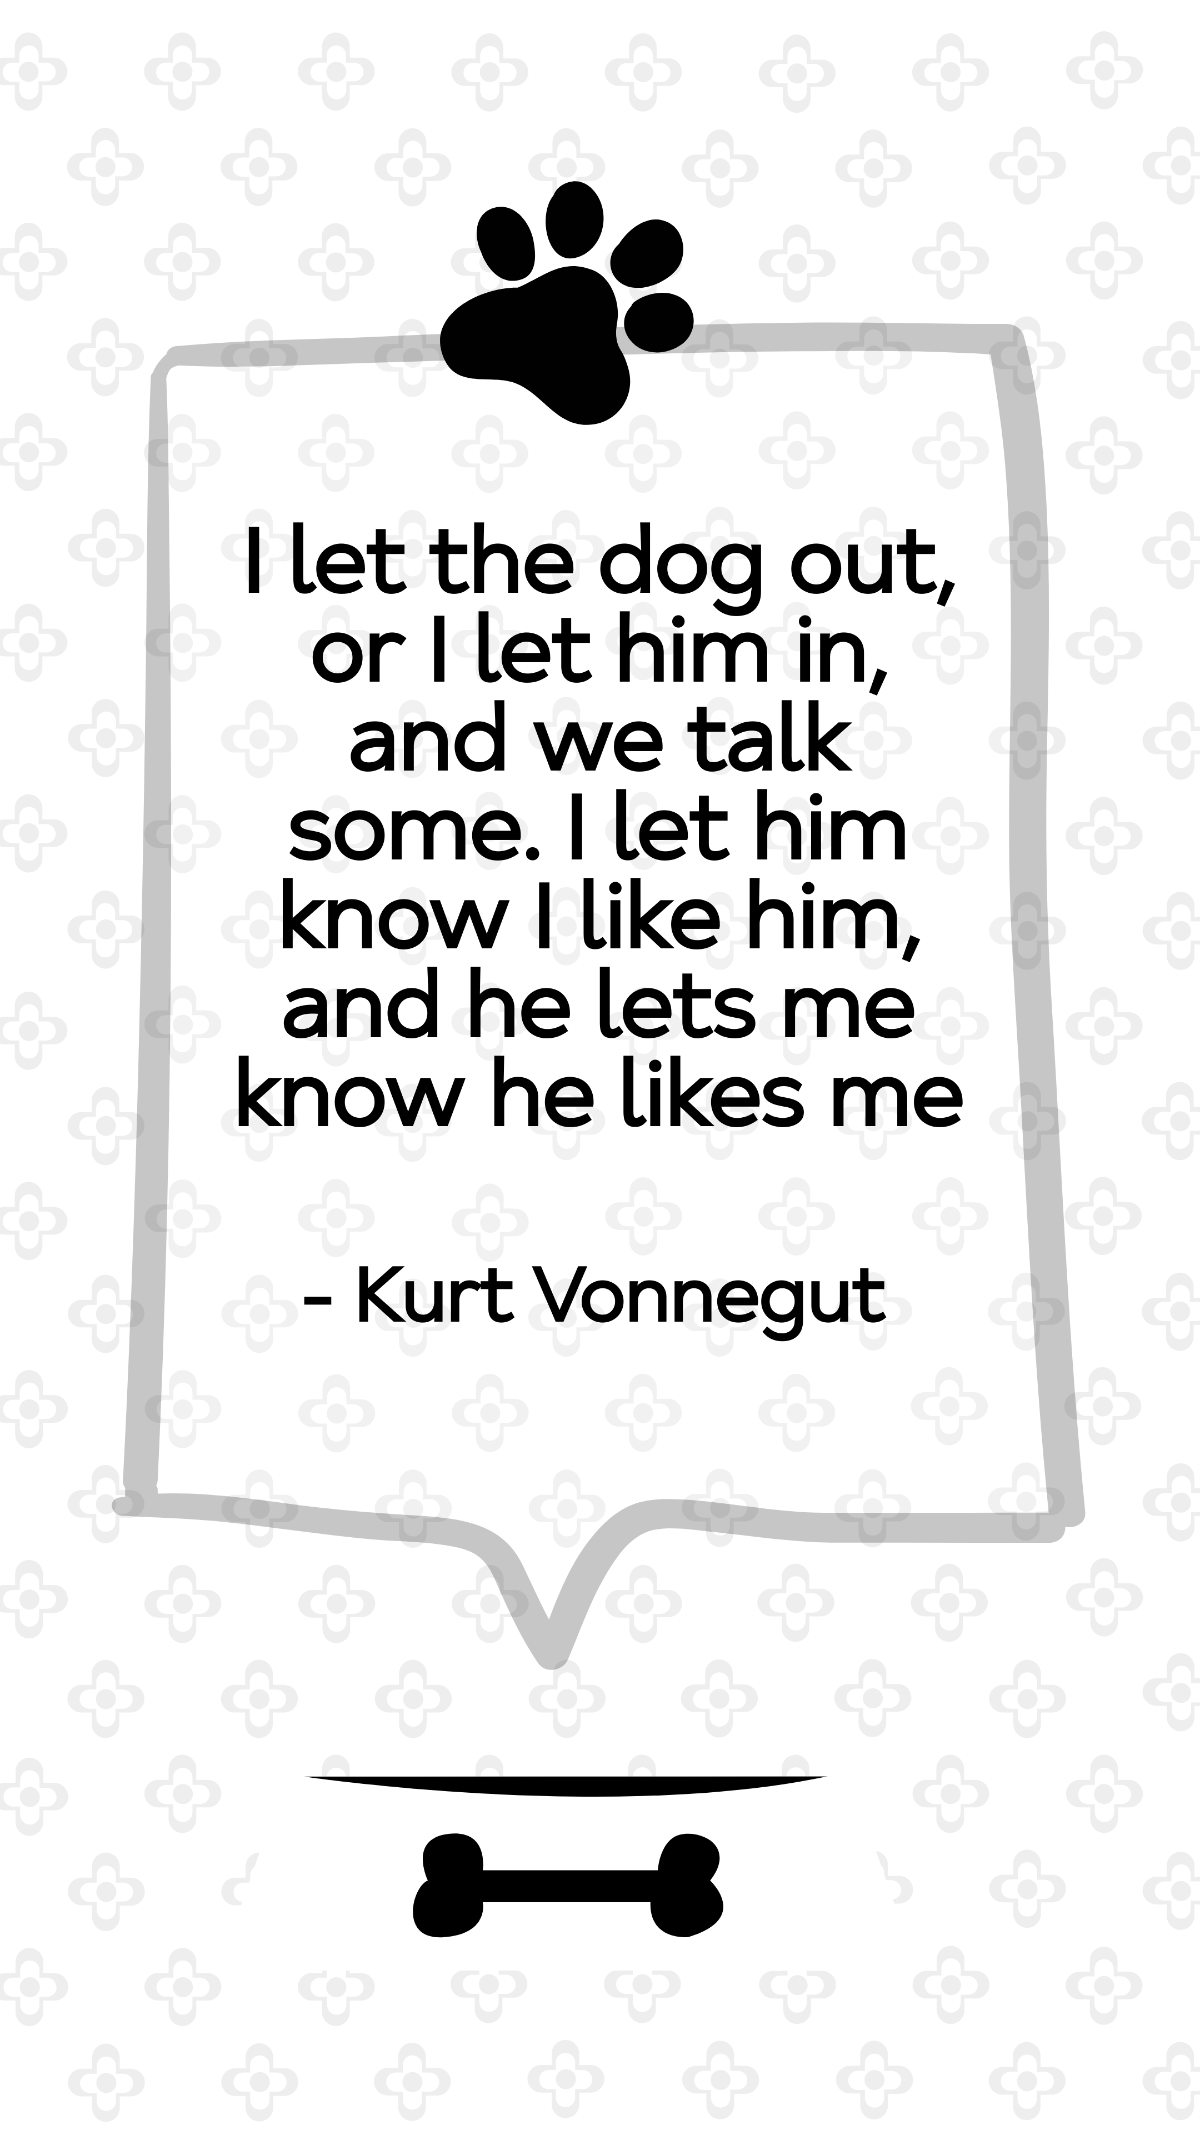 Kurt Vonnegut - I let the dog out, or I let him in, and we talk some. I let him know I like him, and he lets me know he likes me Template